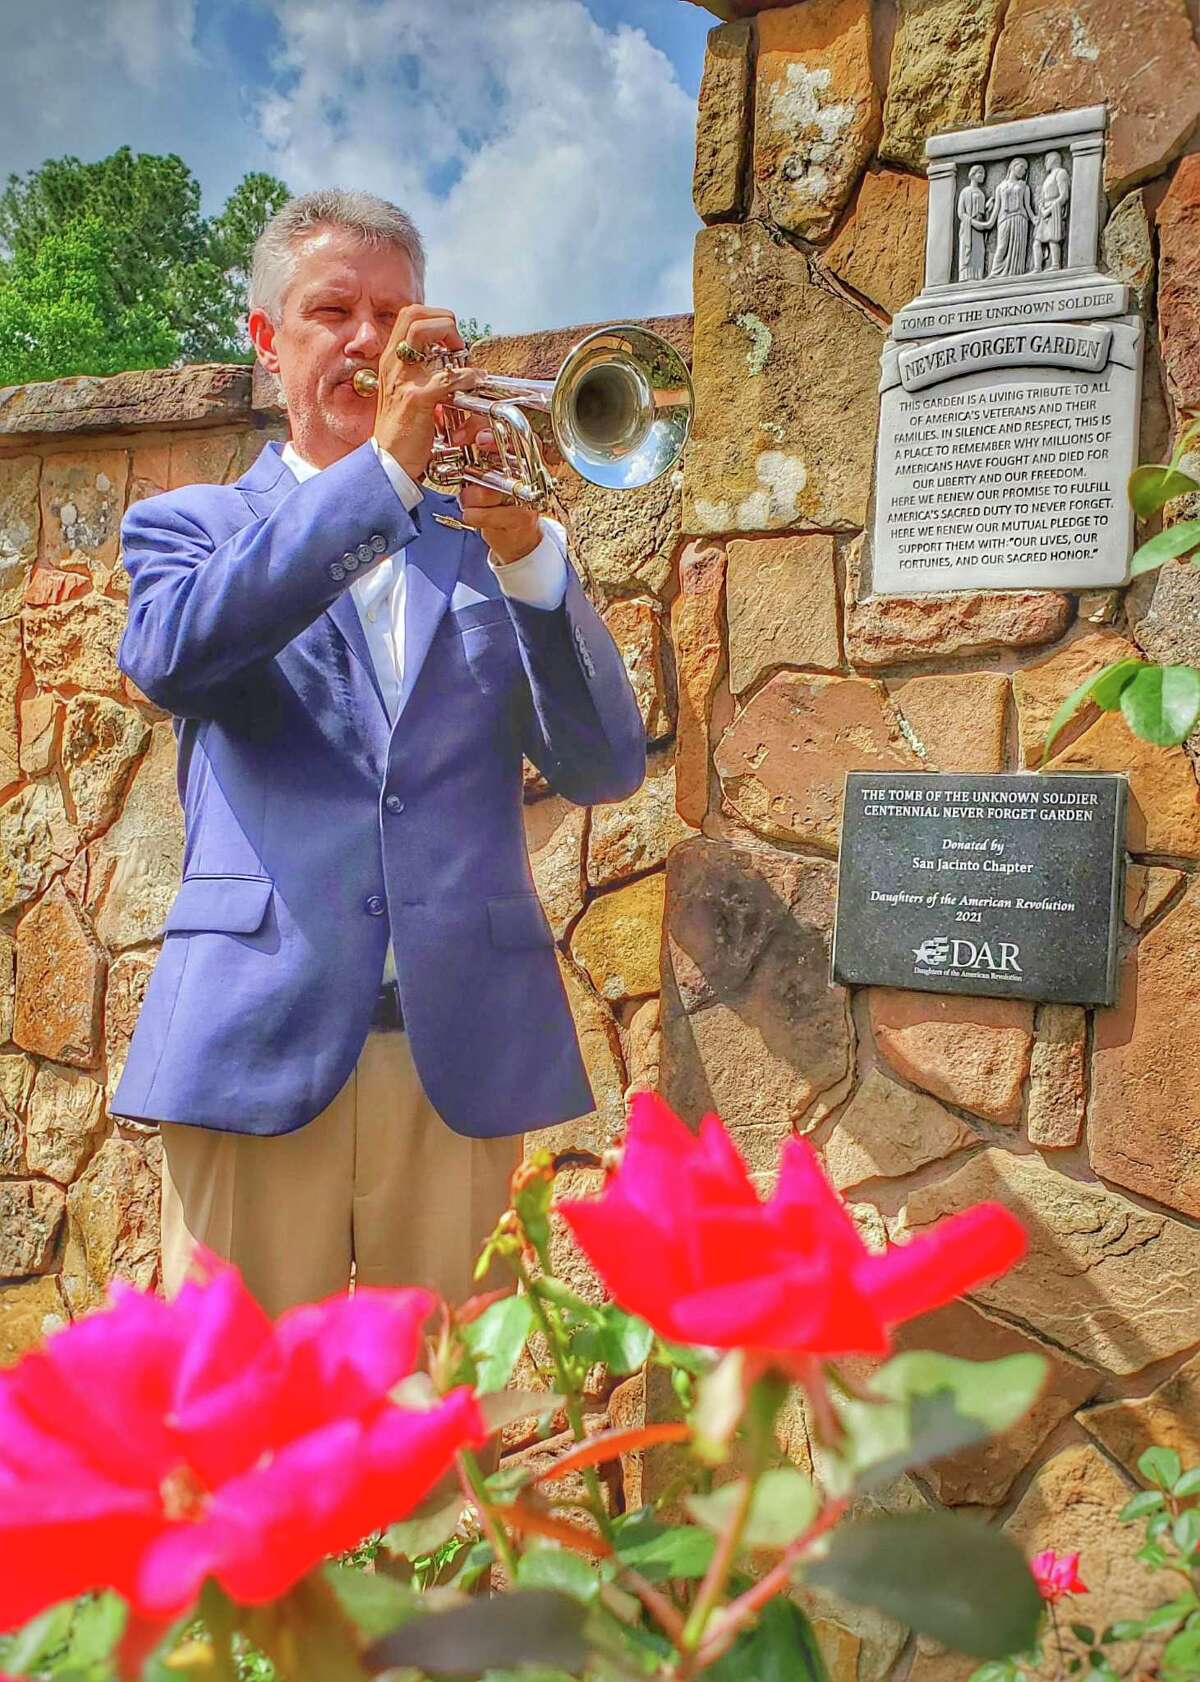 Trumpeter Len Valka closed the Never Forget Garden dedication with a rendition of Taps